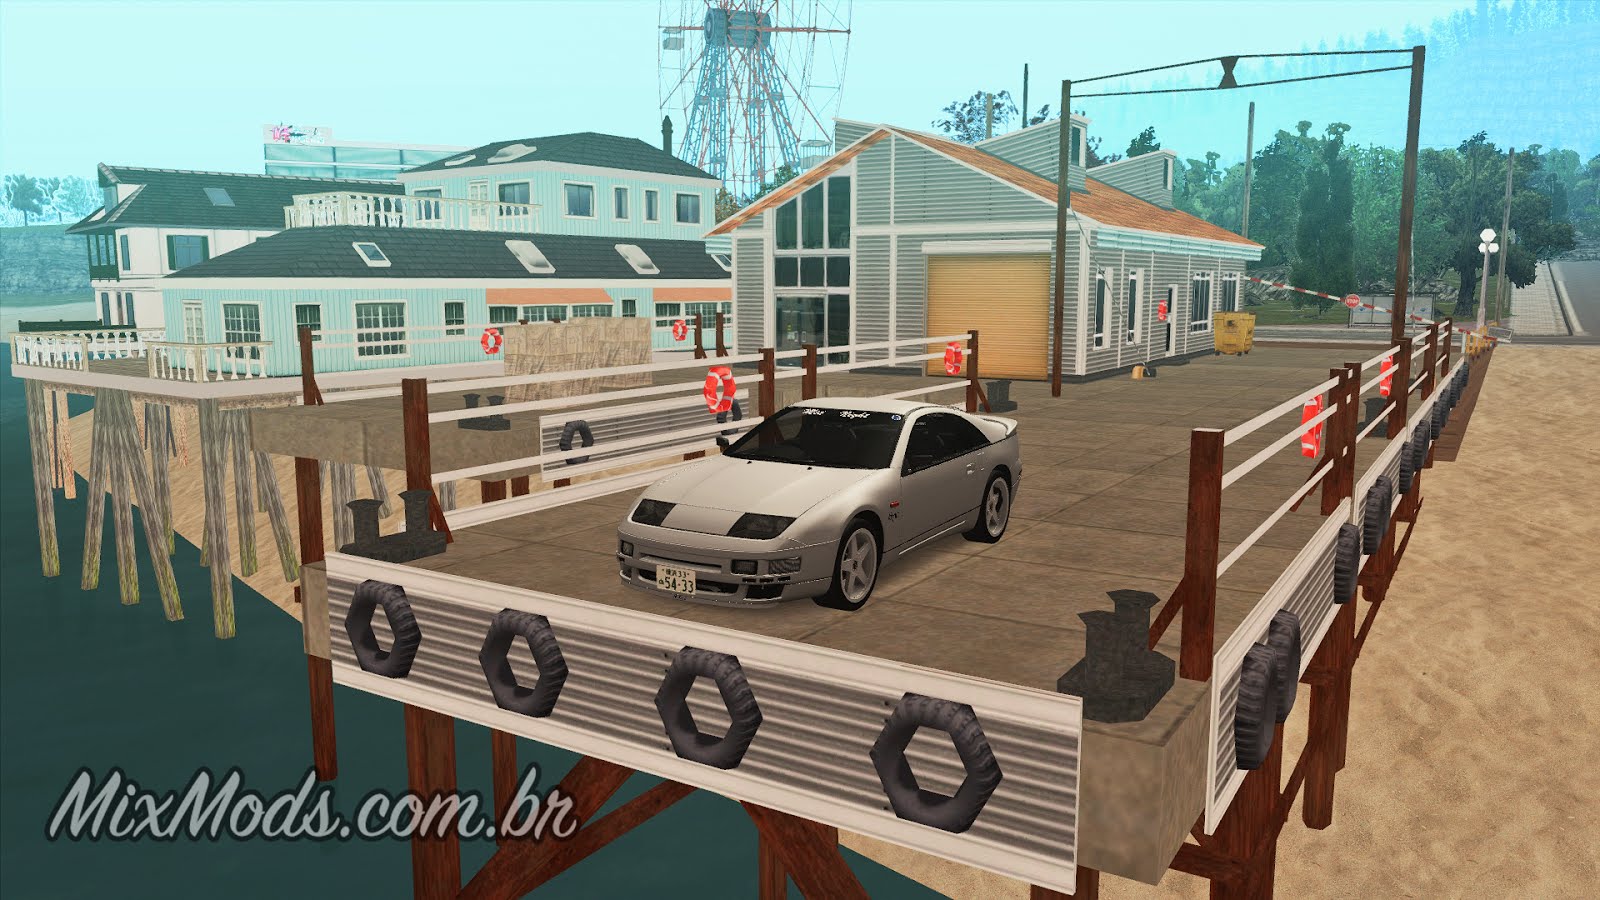 Graphic mods for GTA San Andreas (iOS, Android): 122 ENB mods for